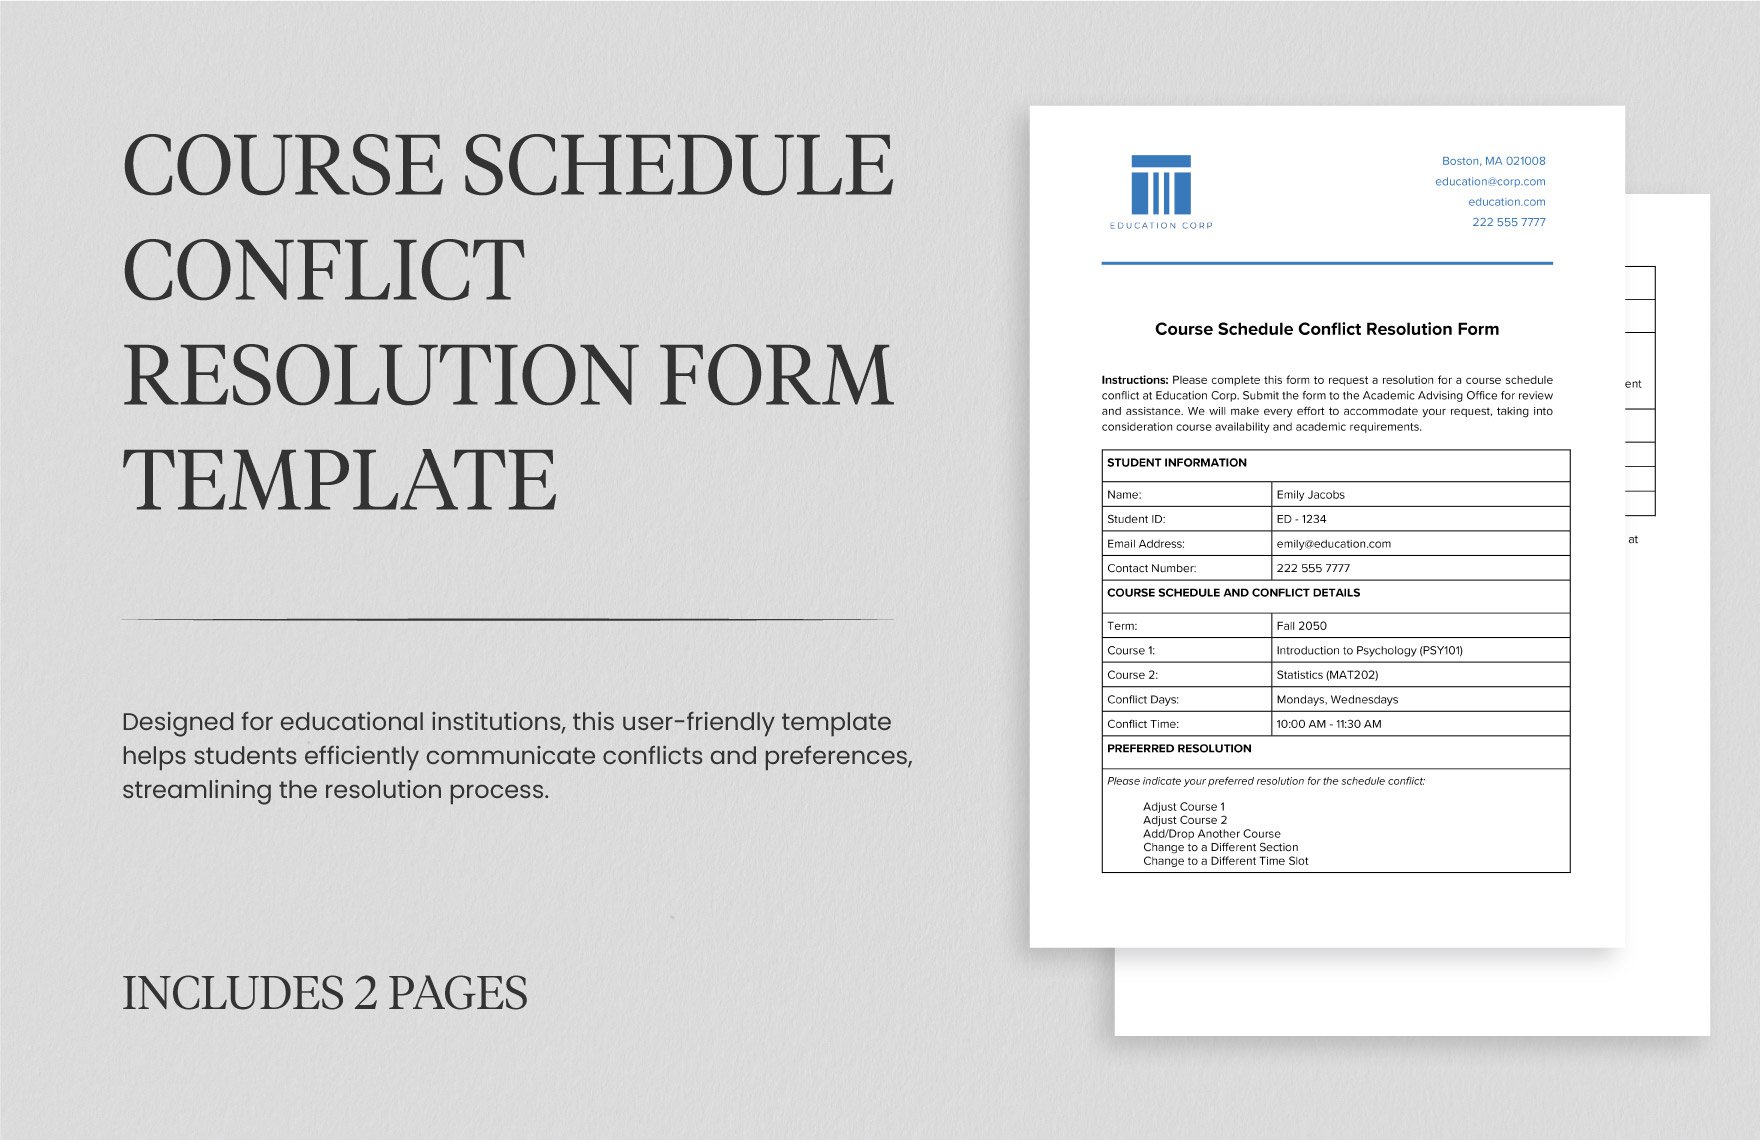 Course Schedule Conflict Resolution Form Template in Word, Google Docs, PDF